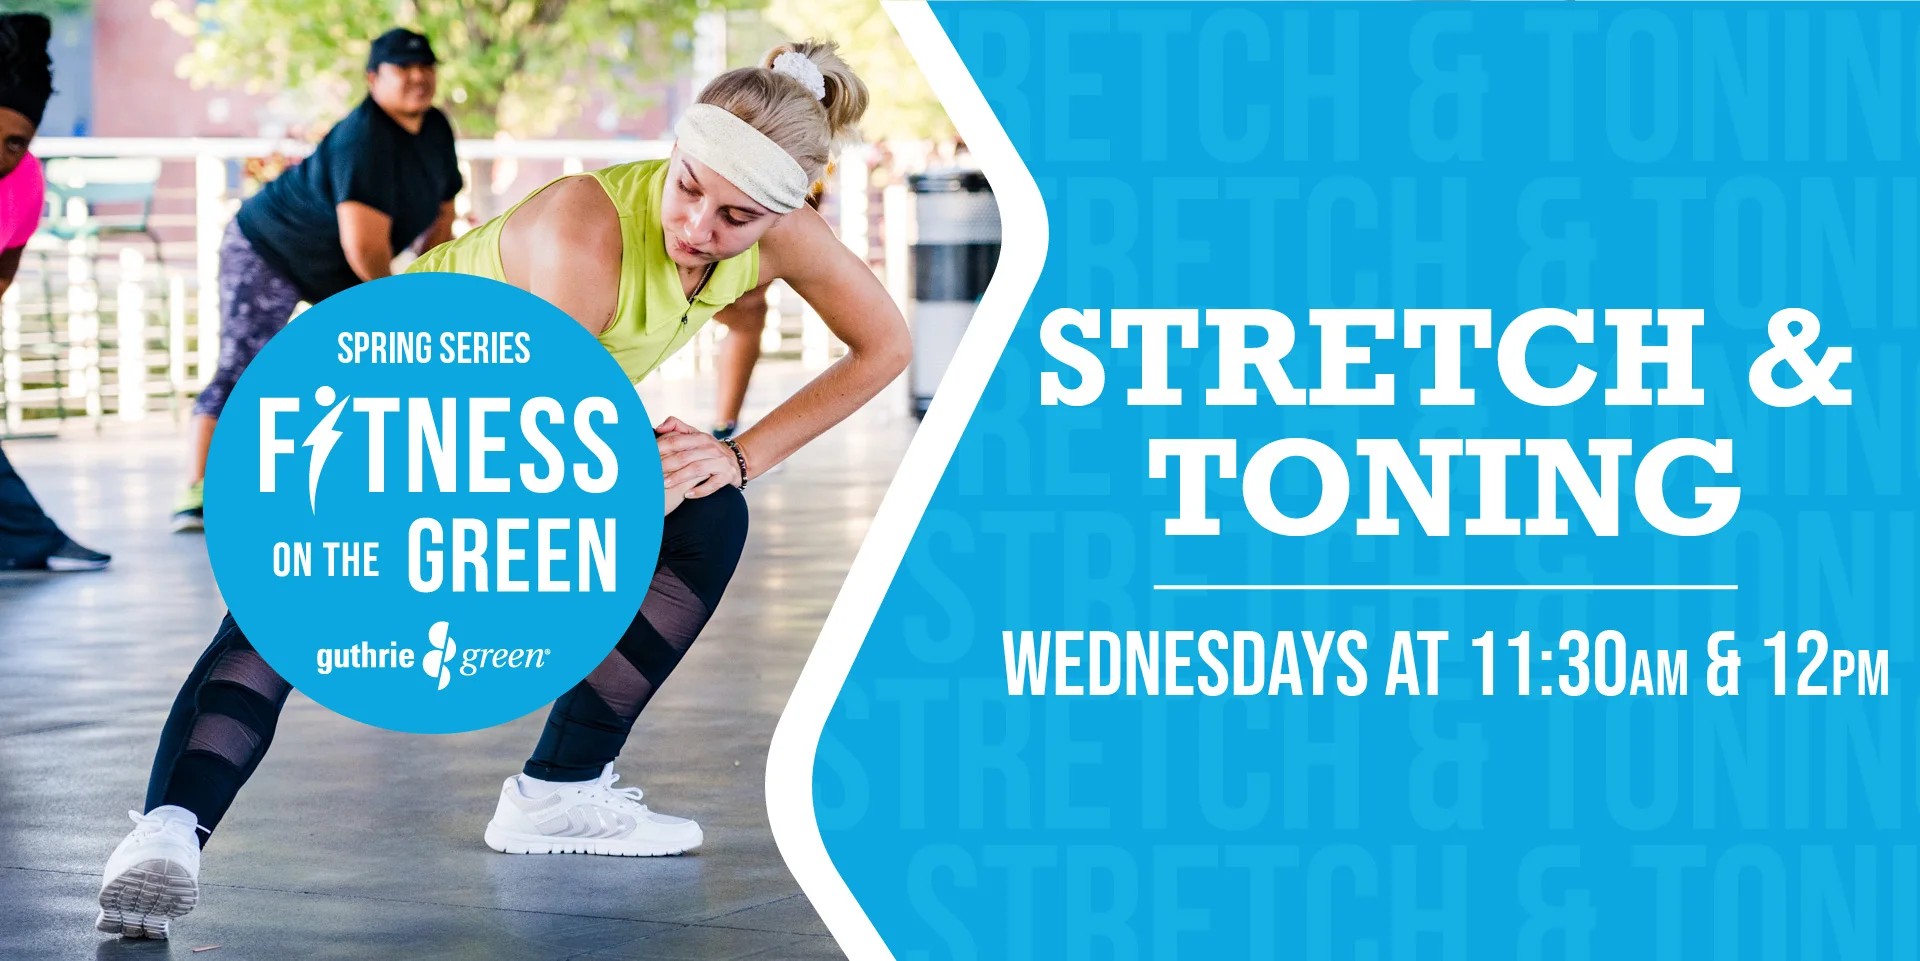 Stretch and Toning - Fitness on the Green